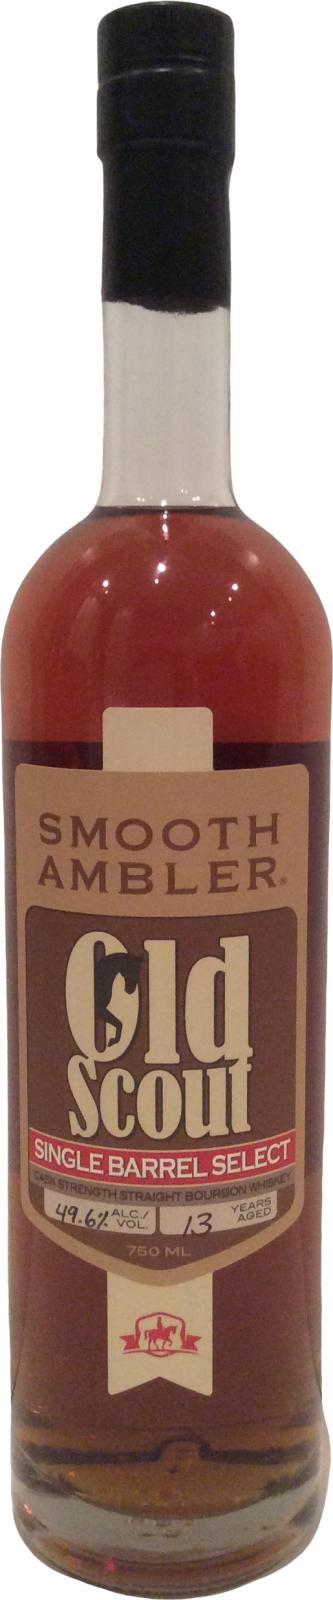 Smooth Ambler Old Scout Single Barrel Select #13611 49.6% 750ml